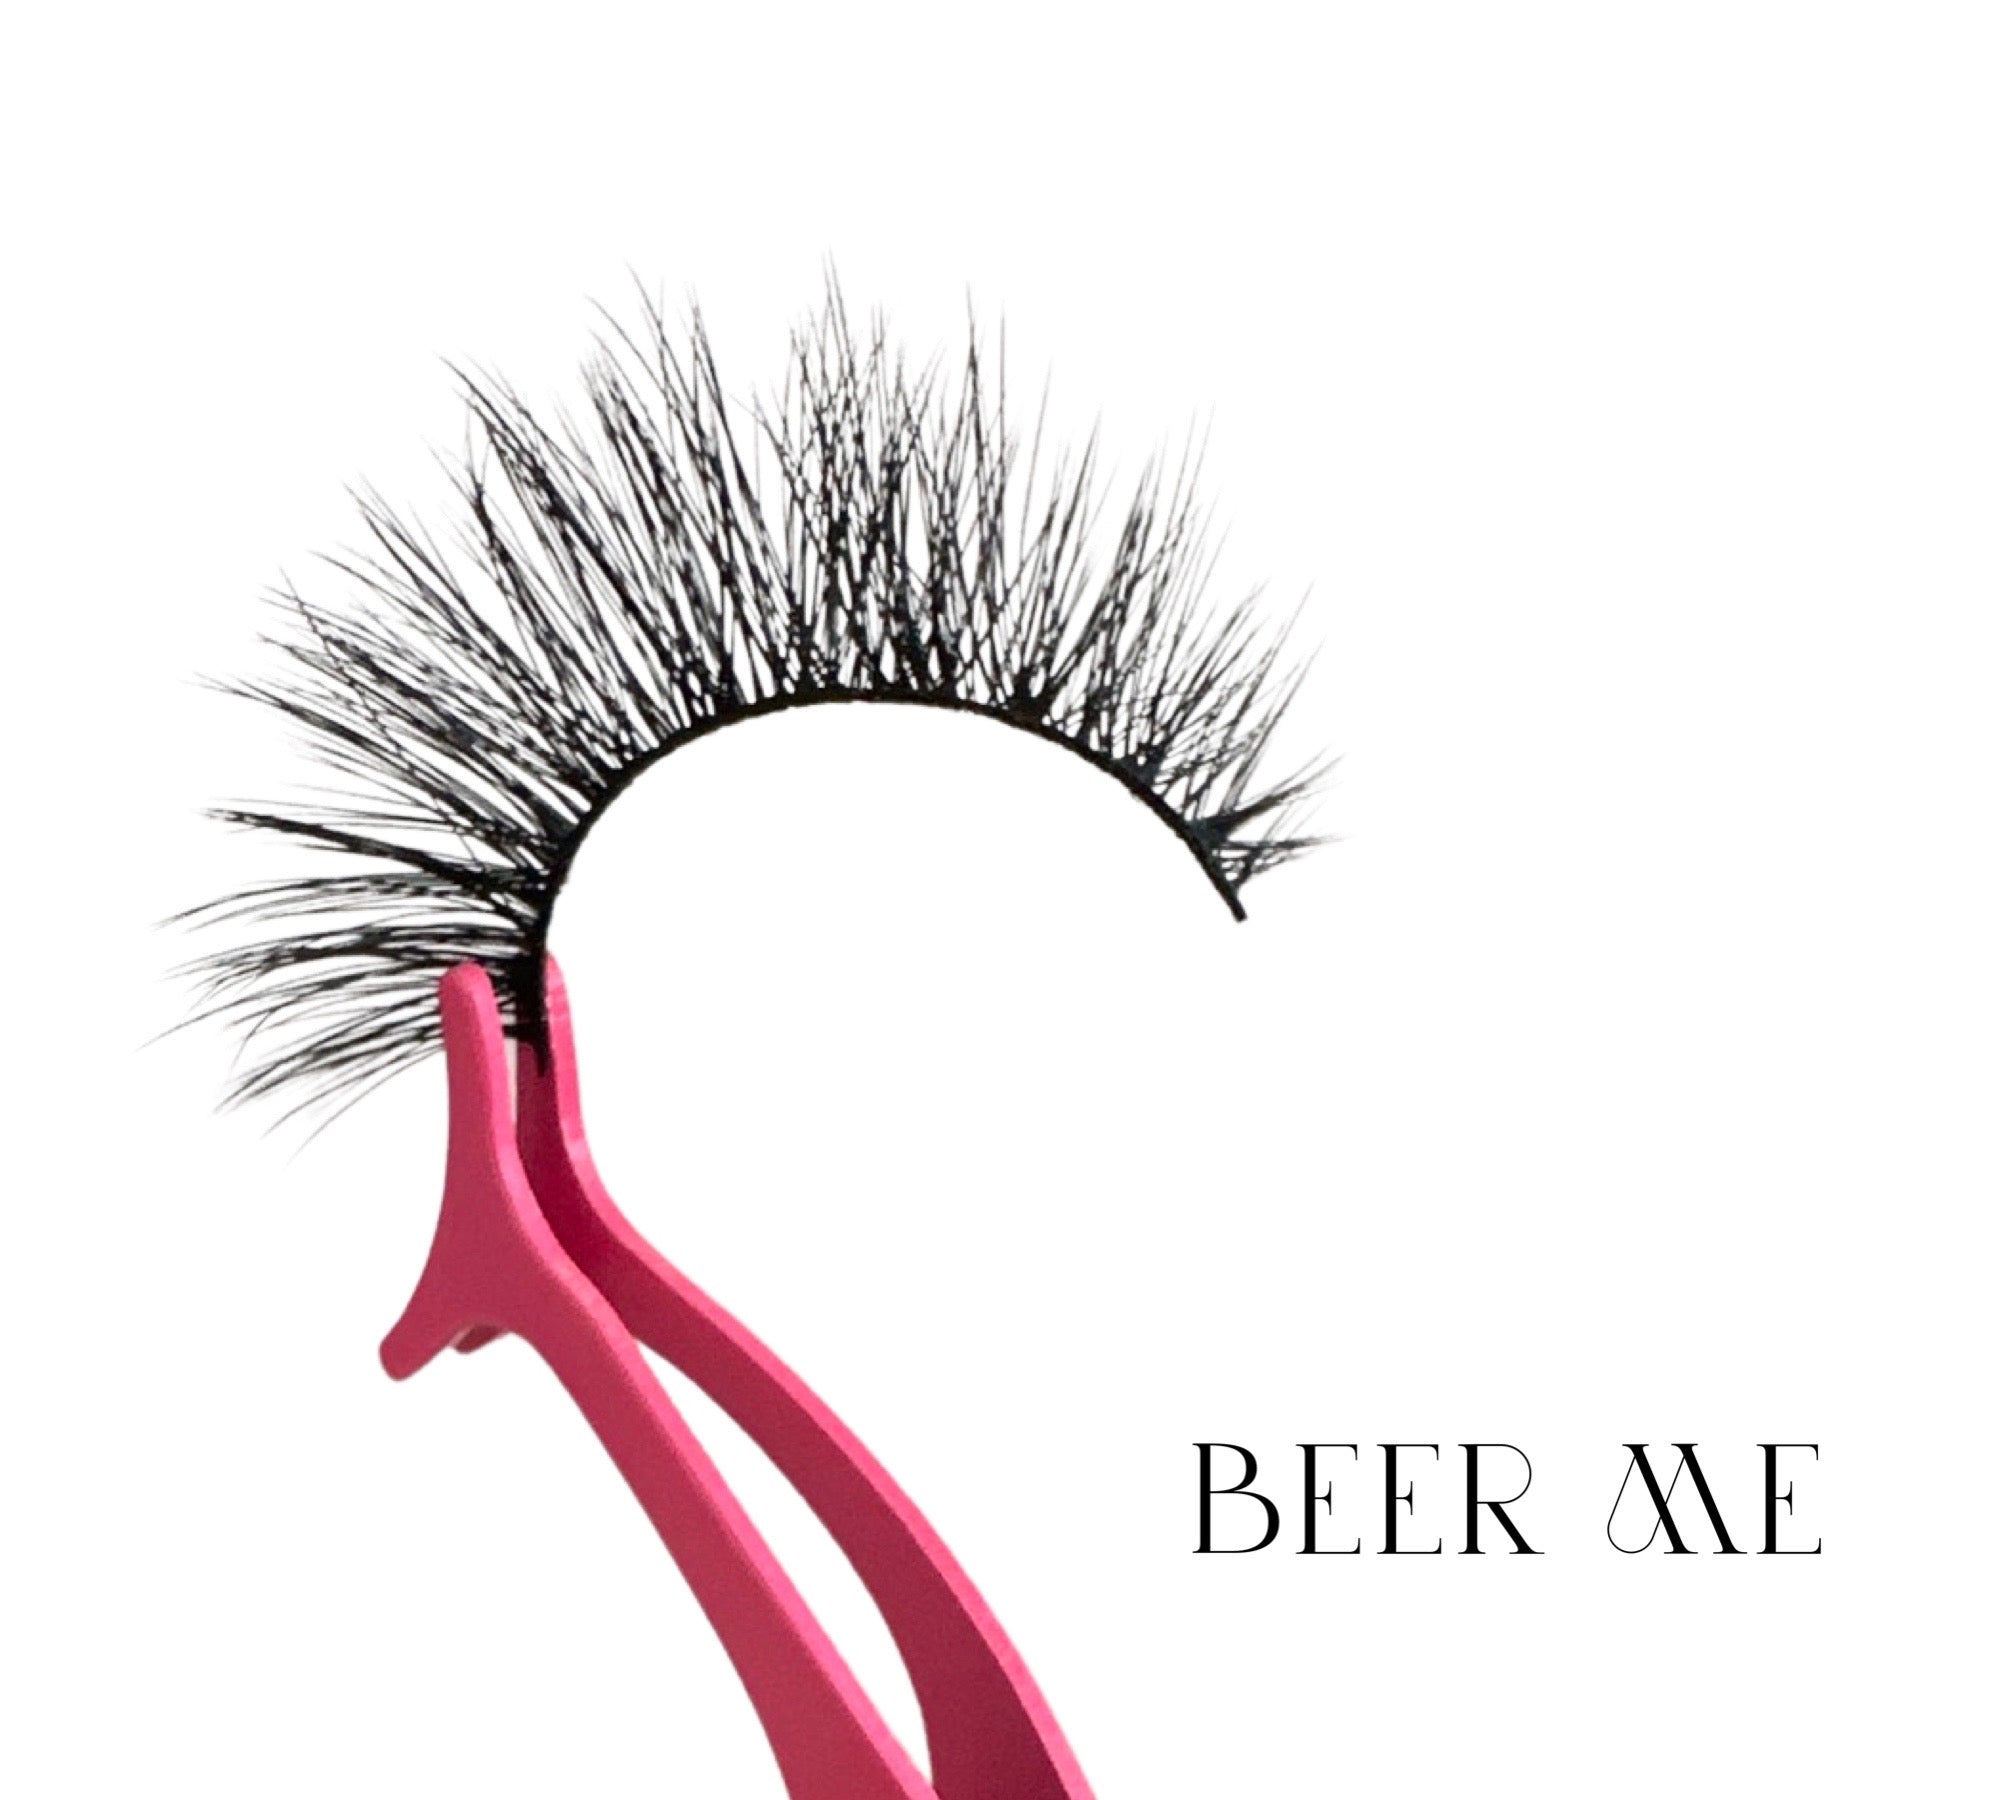 3D Silk lashes "Beer Me"